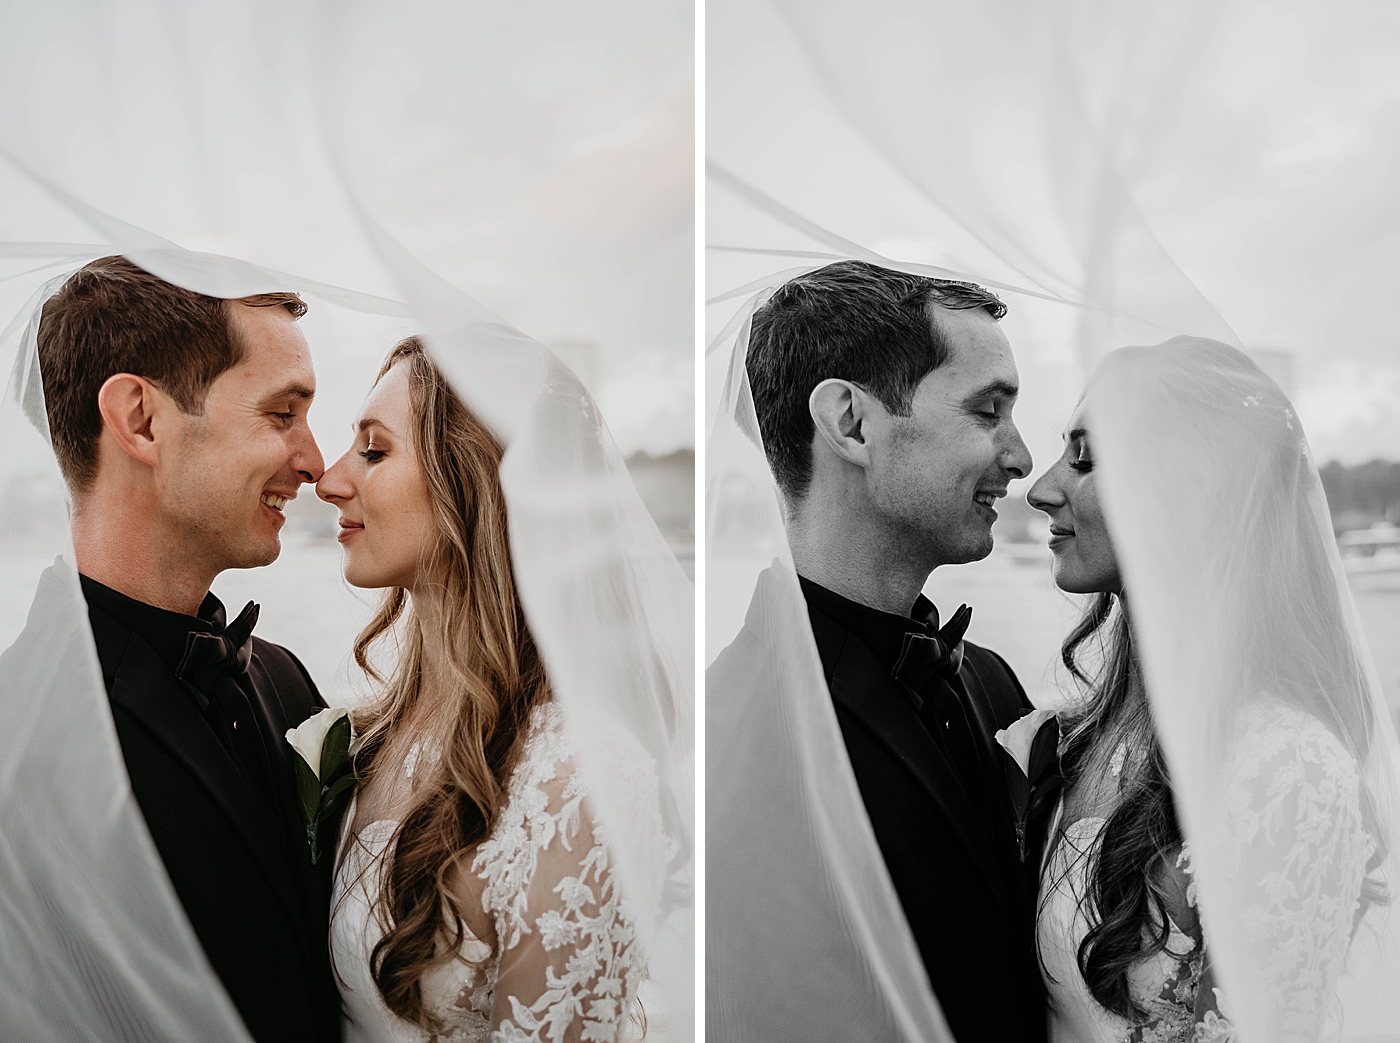 Bride and Groom under veil Waterstone Resort and Marina Wedding captured by South Florida Wedding Photographer Krystal Capone Photography